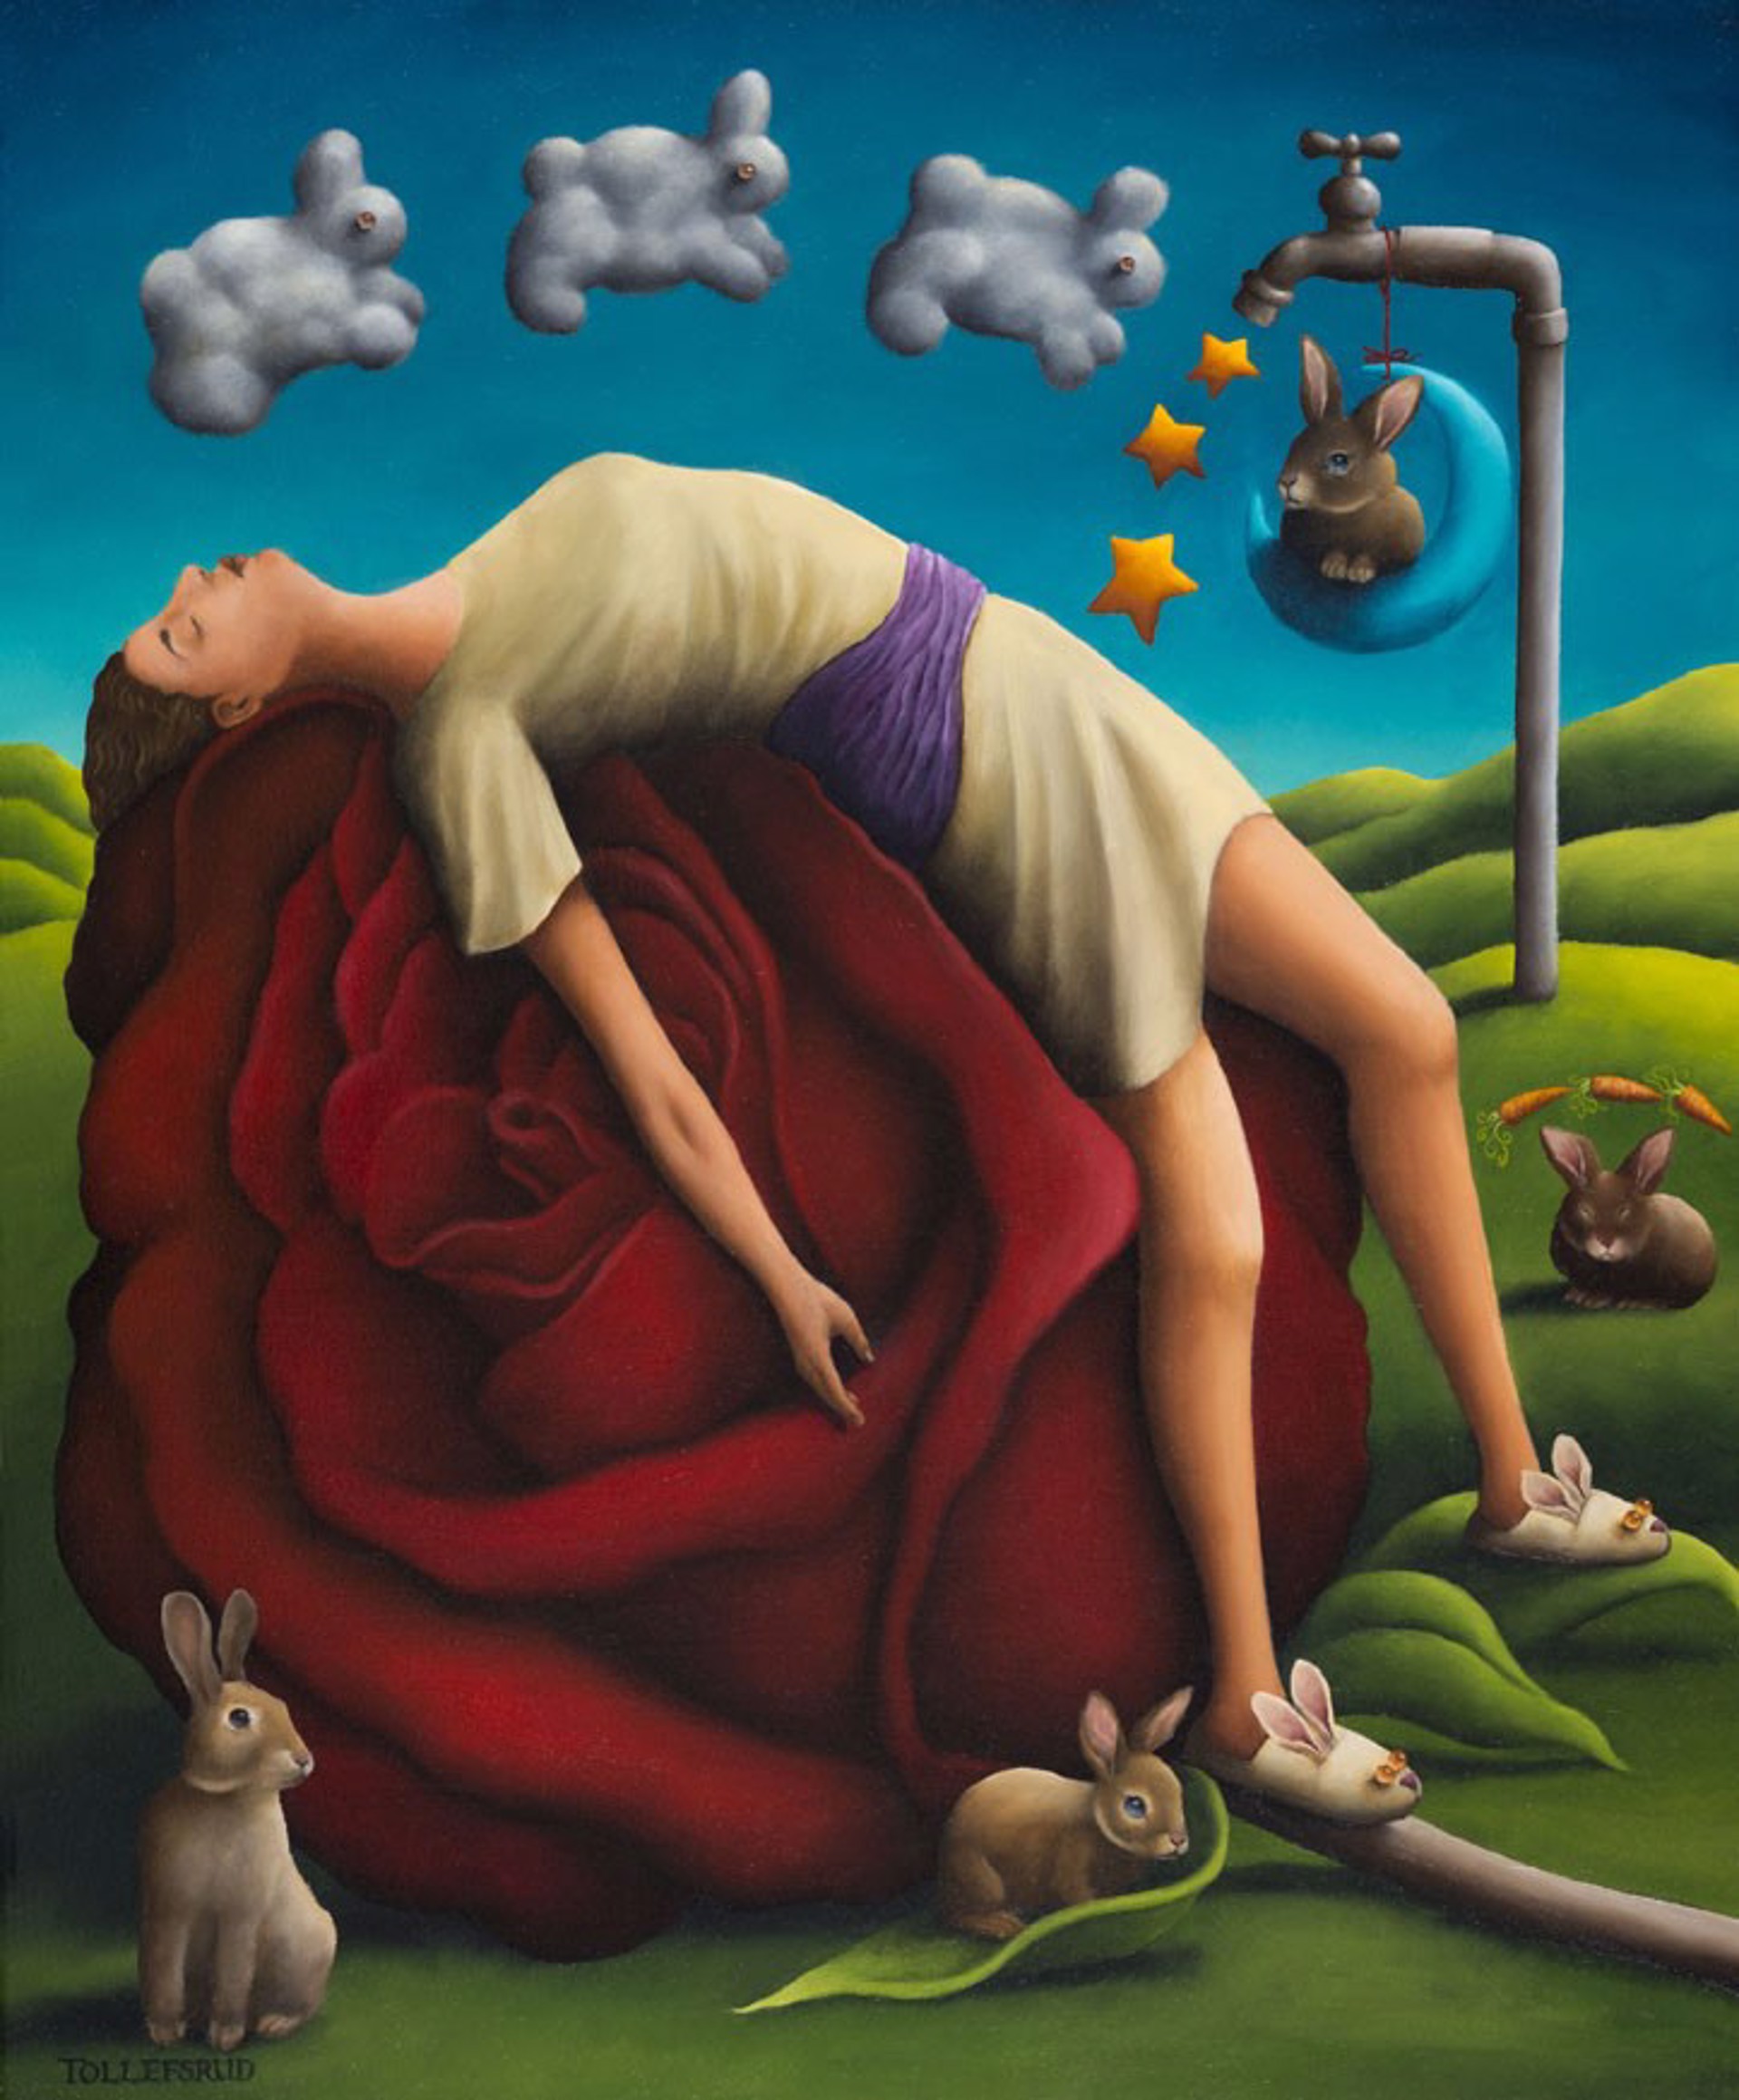 Repose on the Rose with Rabbits by Cynthia Tollefsrud